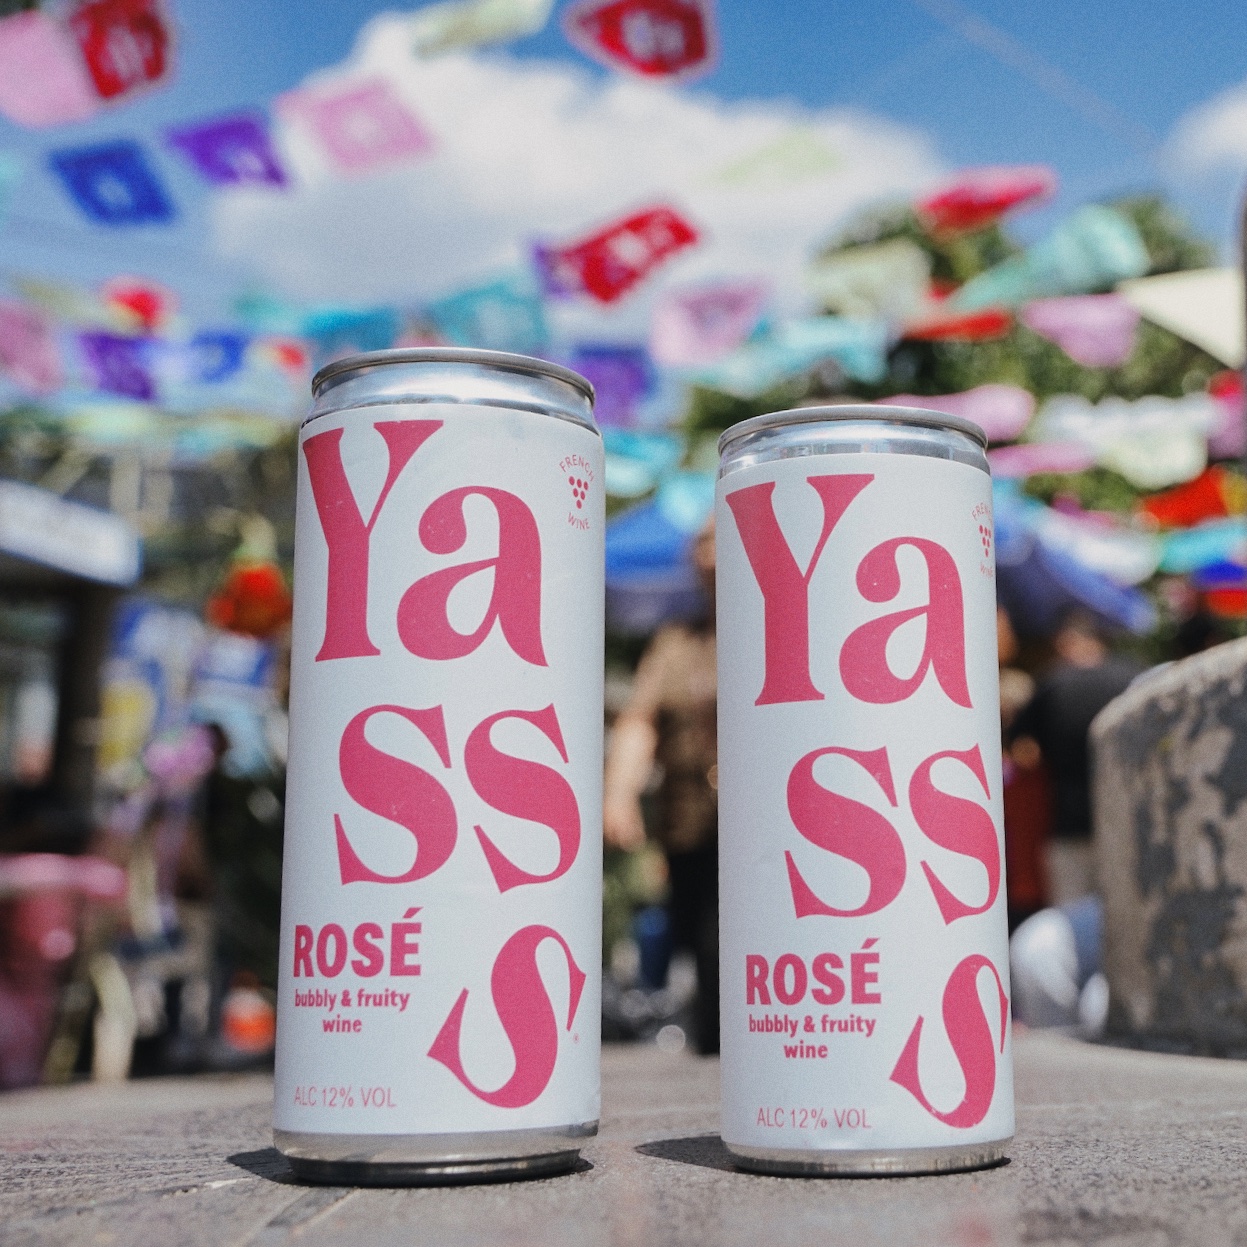 Yasss Rosé 250ml and Yasss Rosé 330ml on a colorful outdoor background